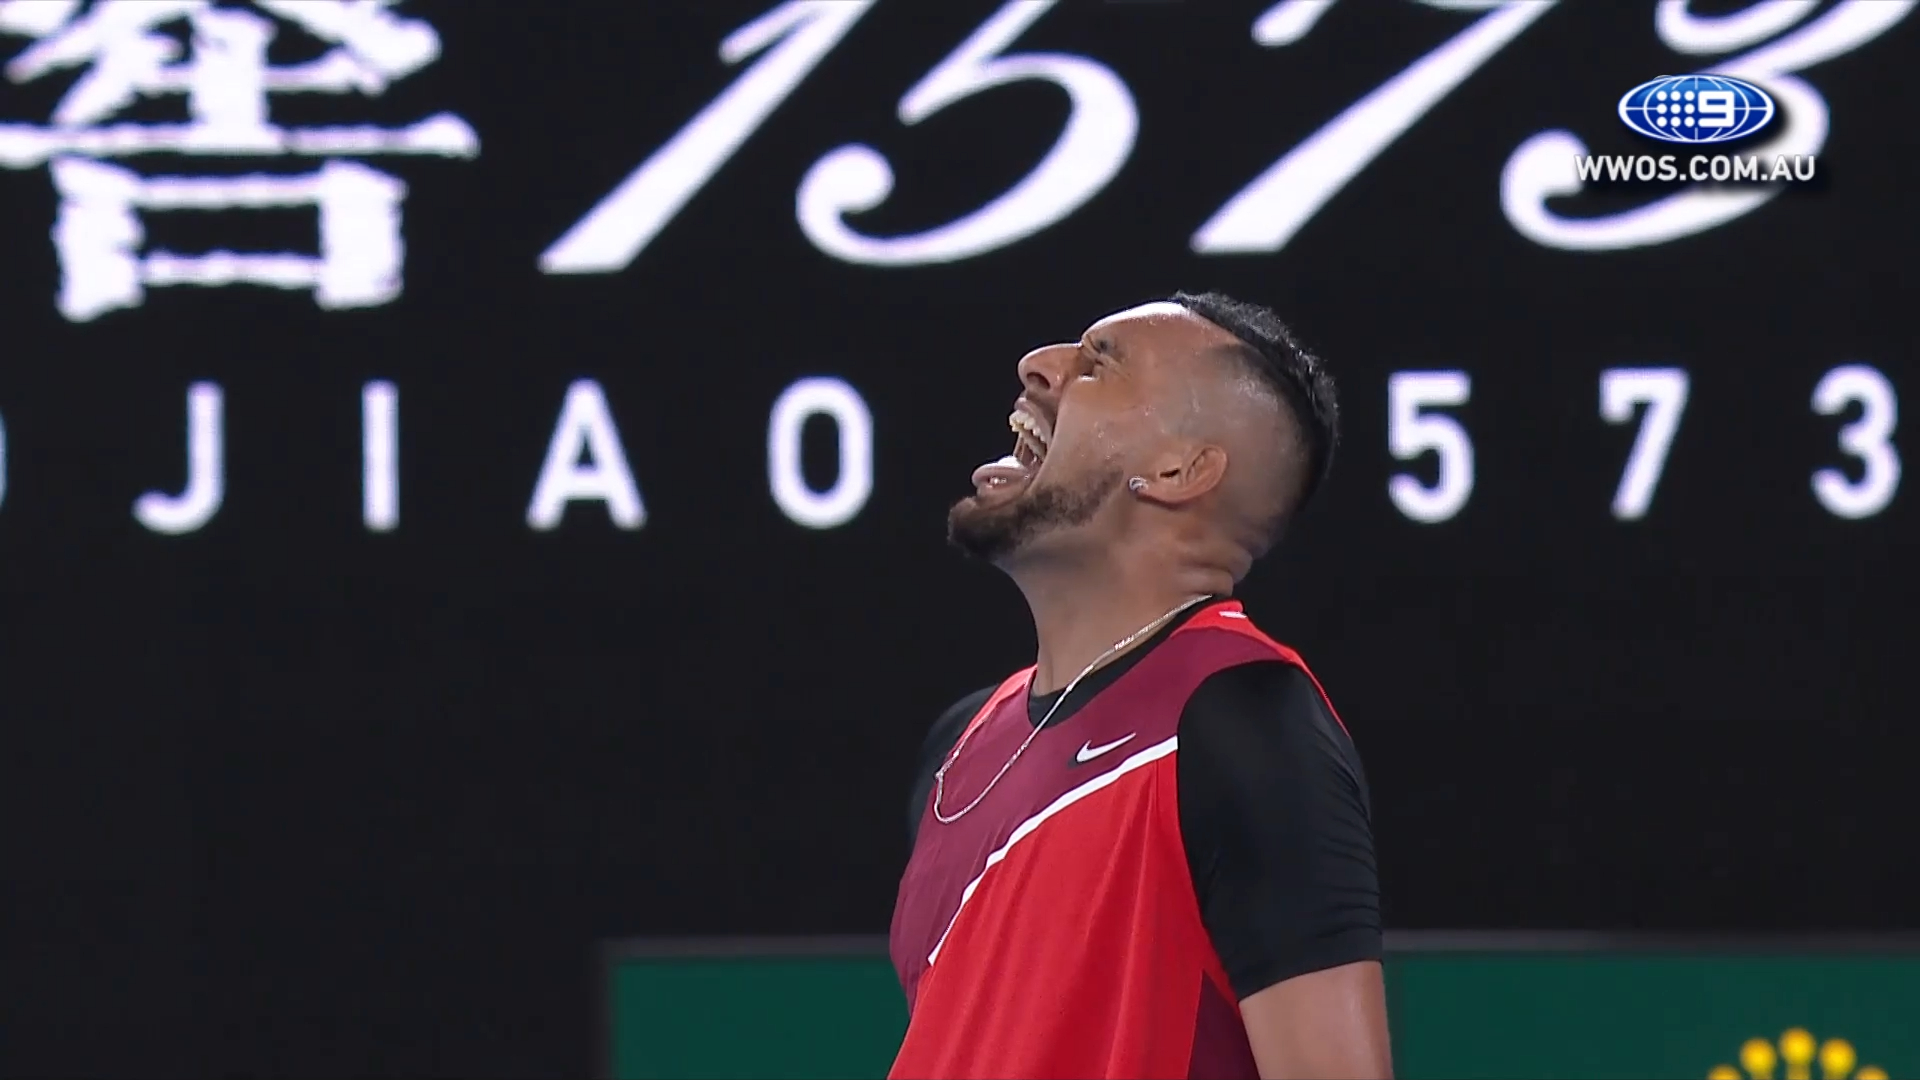 Nick Kyrgios' Top Plays from the 2022 Australian Open